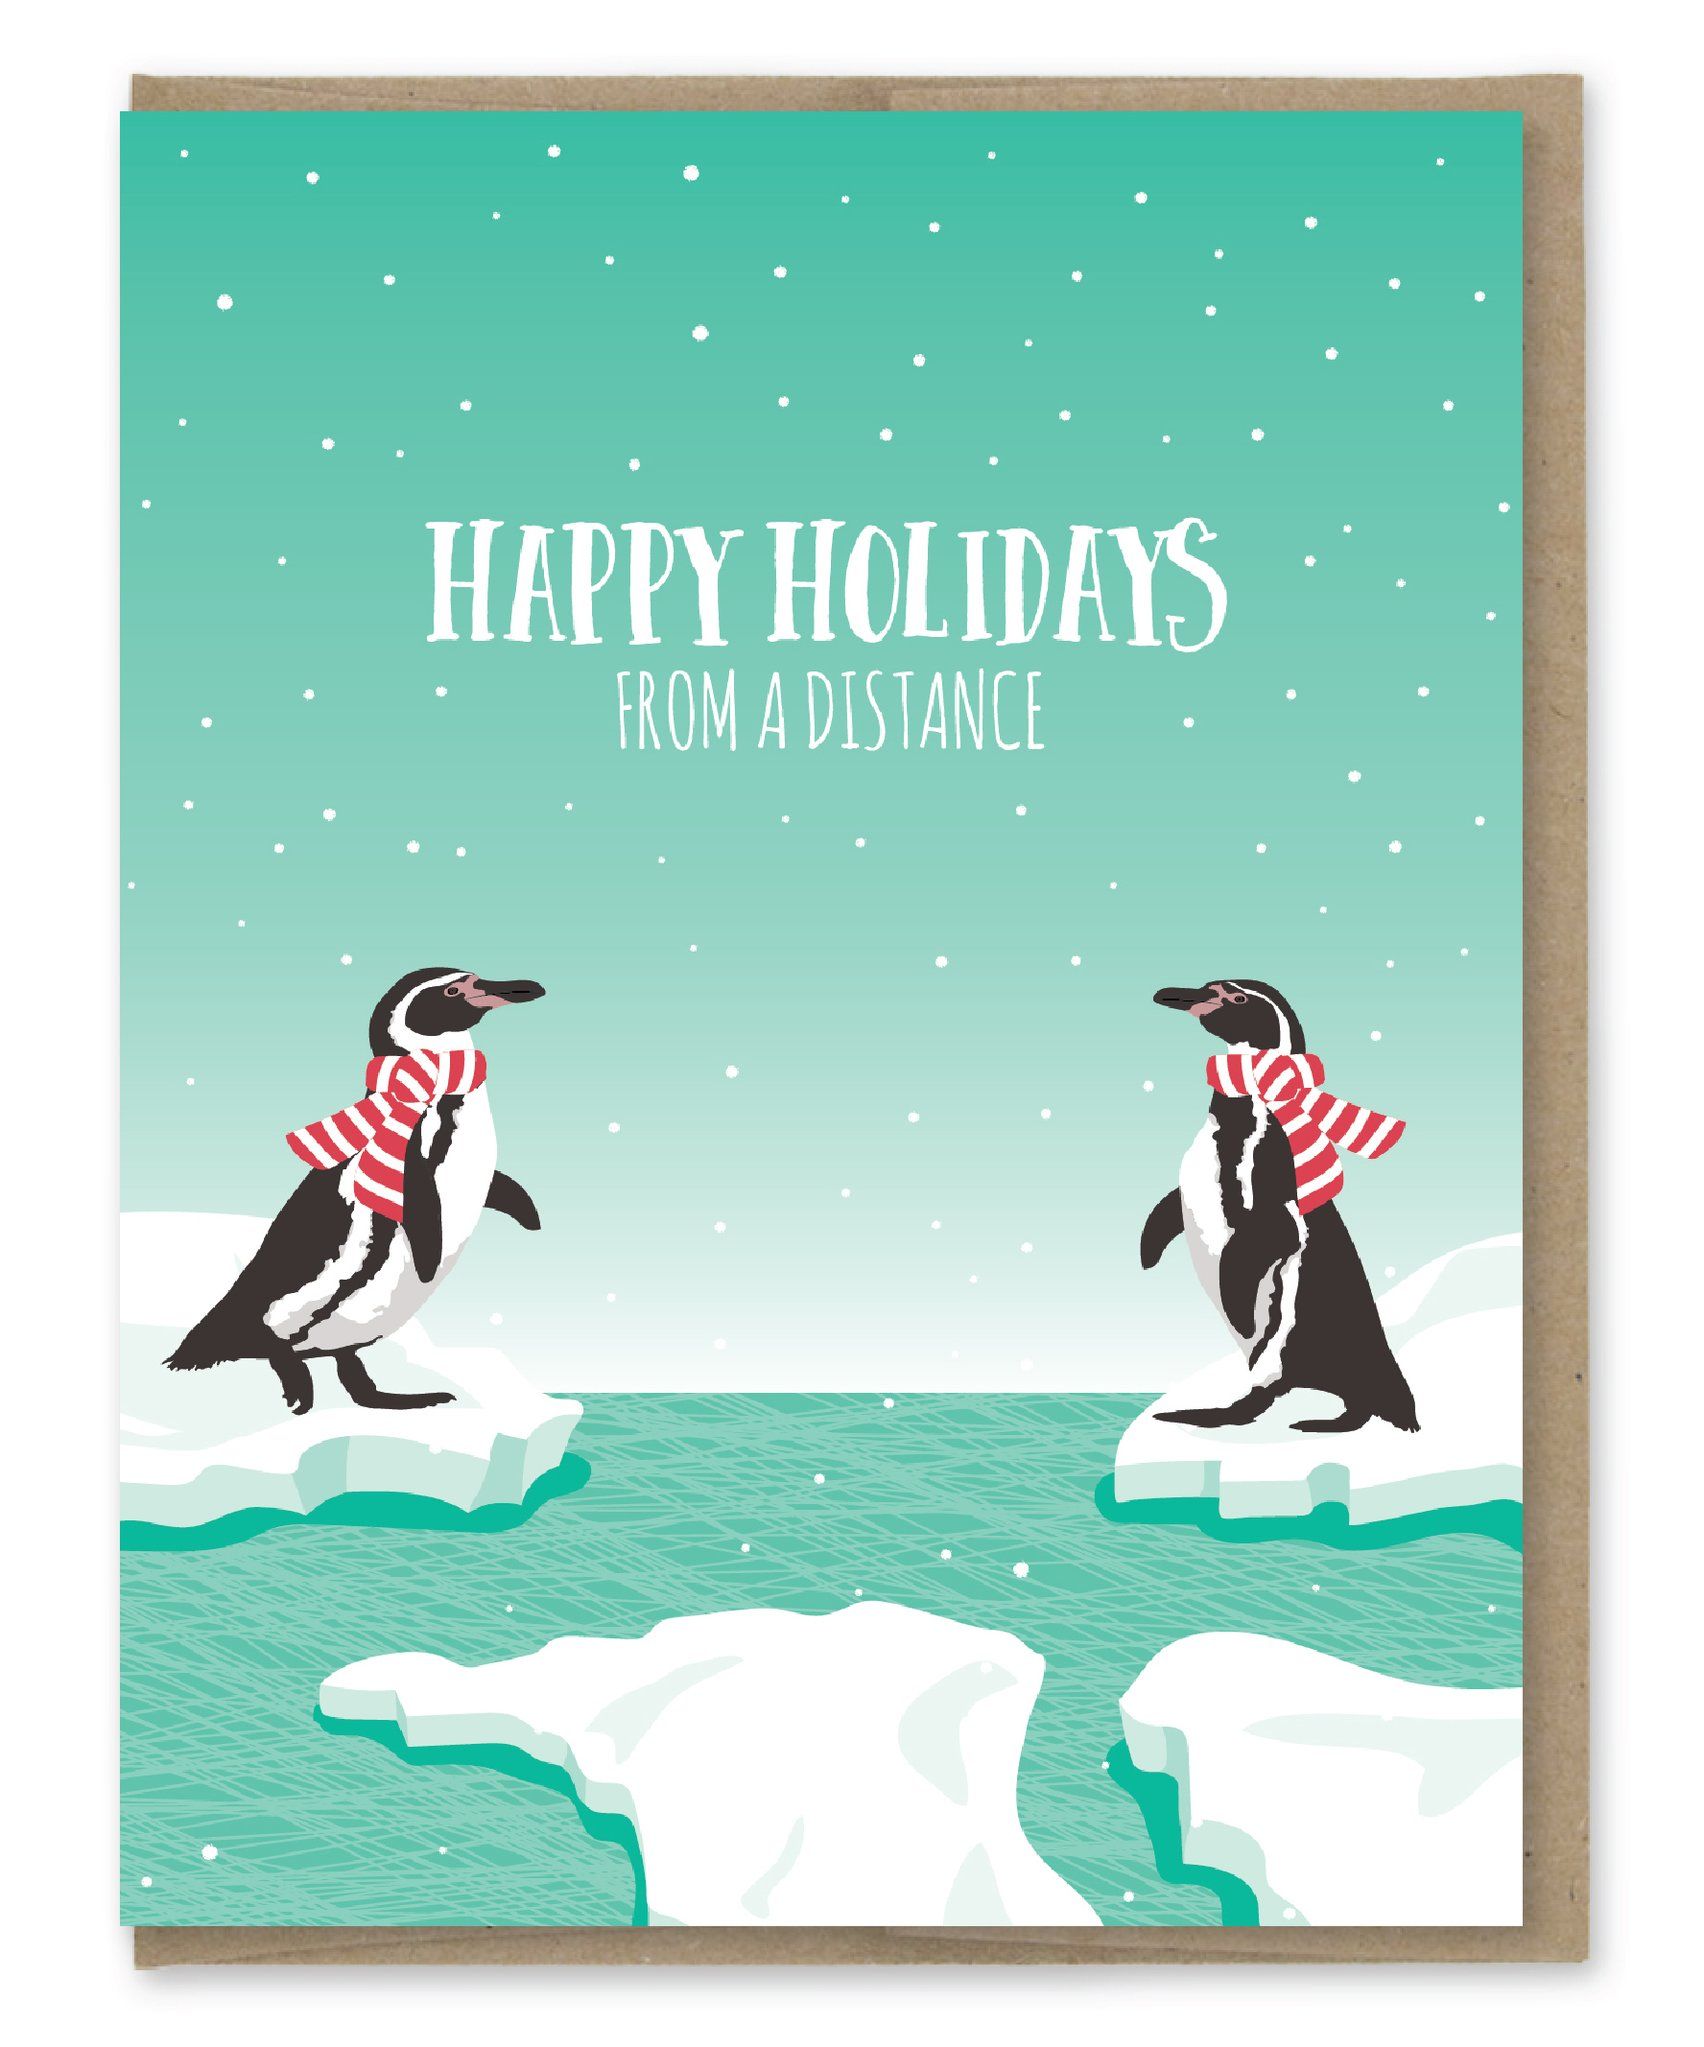 Nondenominational Holiday Card Everyone Holiday Card Peace on Earth Unique Card Generic Holiday Card Inclusive Holidays Happy Holidays